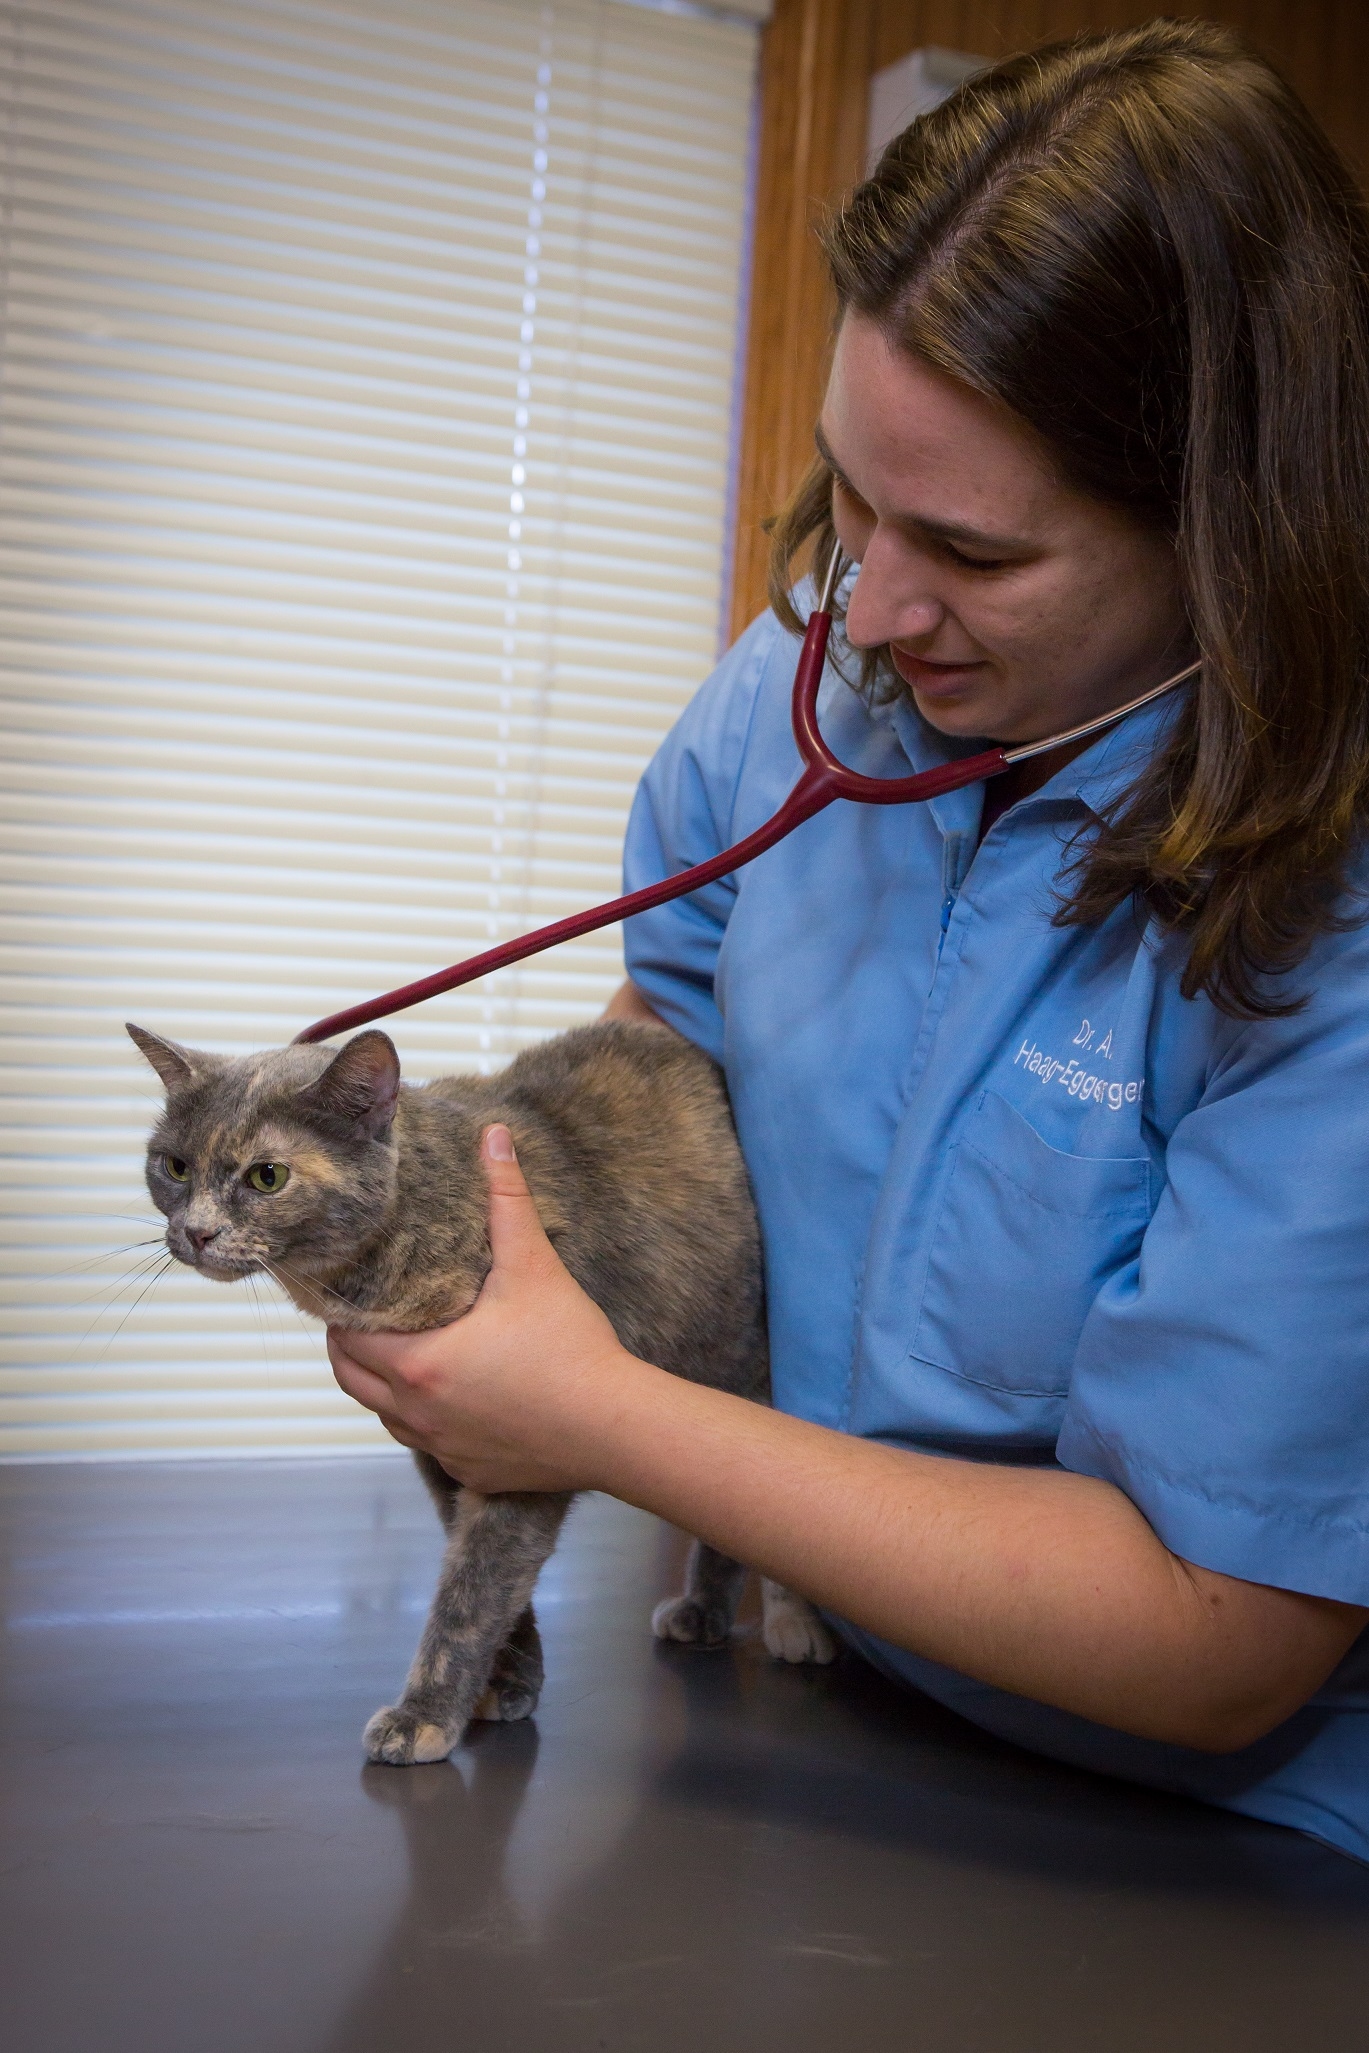 Dr. Haag-Eggenberger is passionate about high-quality pet care. Here, she uses a stethoscope to check this patient's pulmonary health.